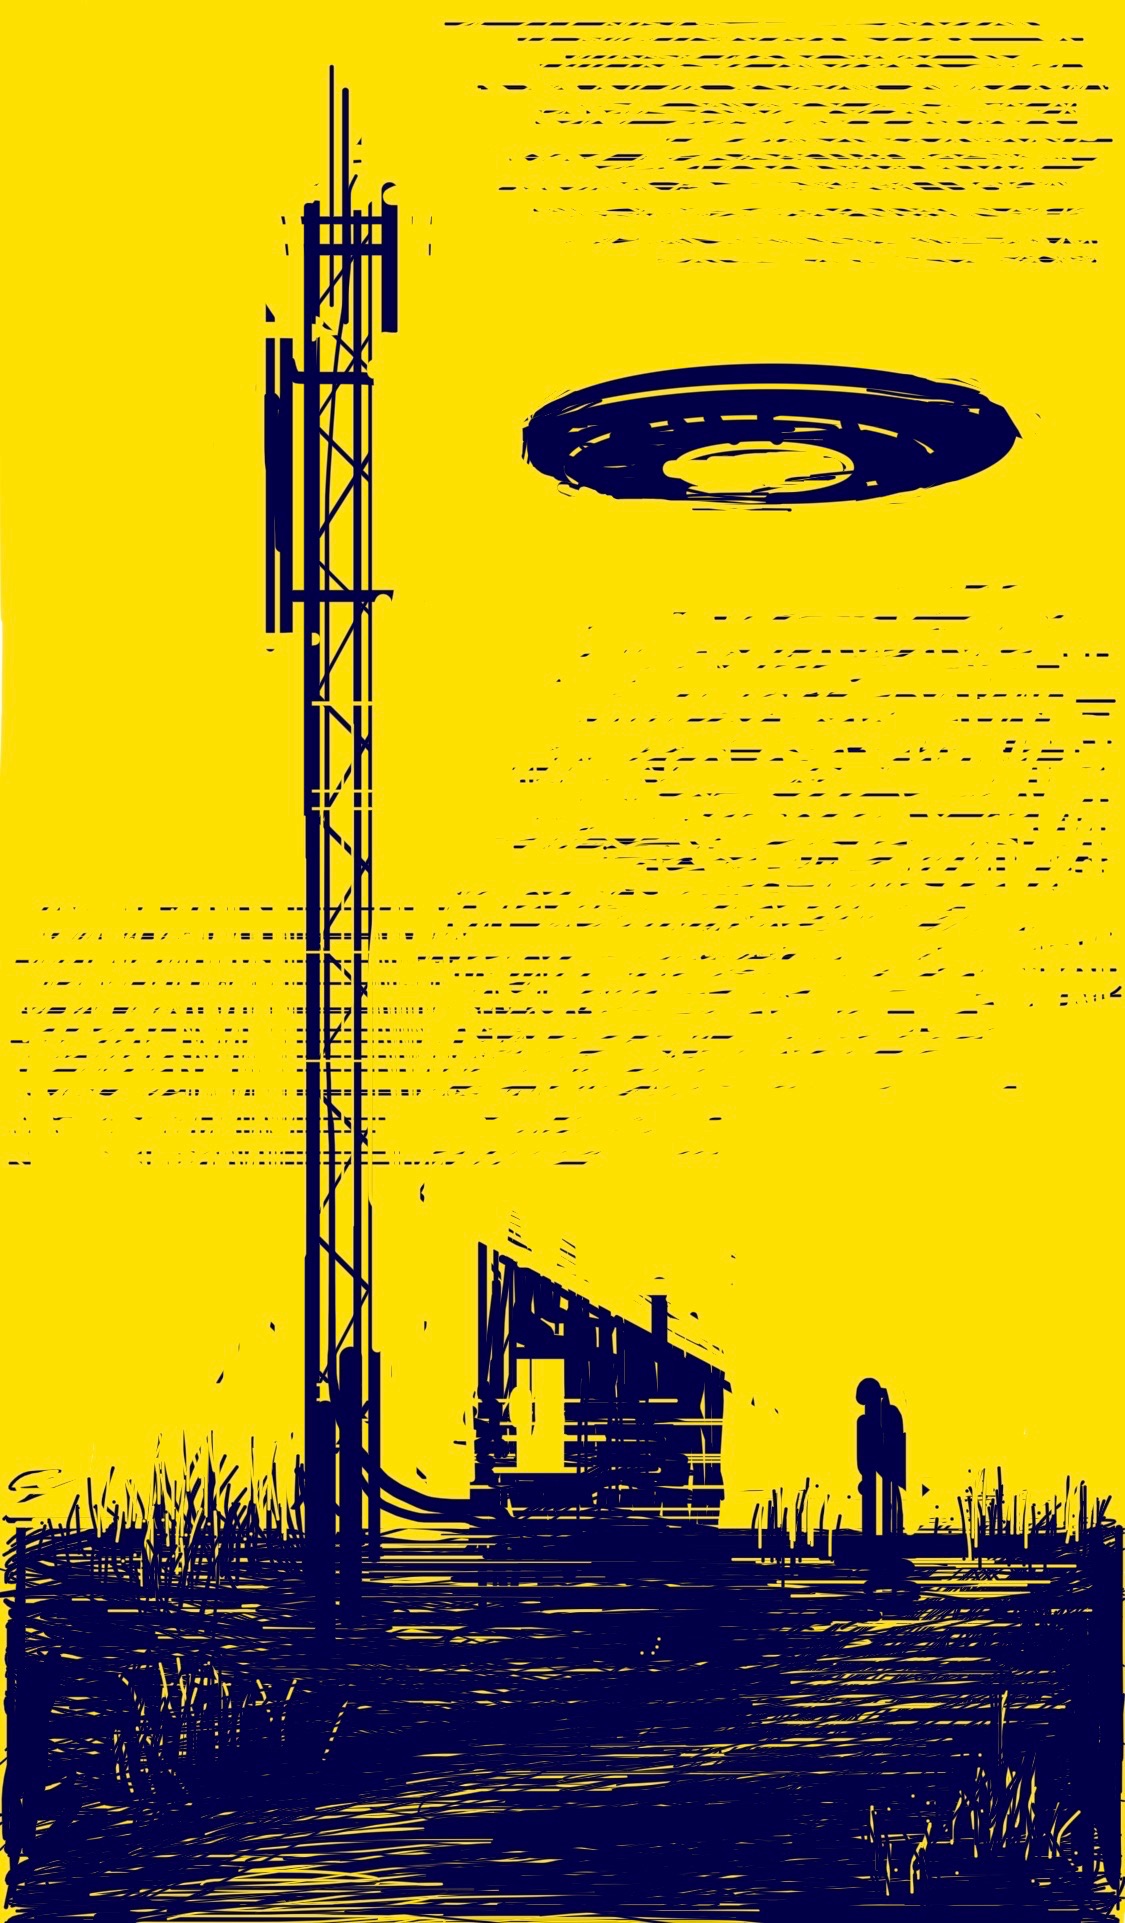 A UFO hovers over a lone radio tower